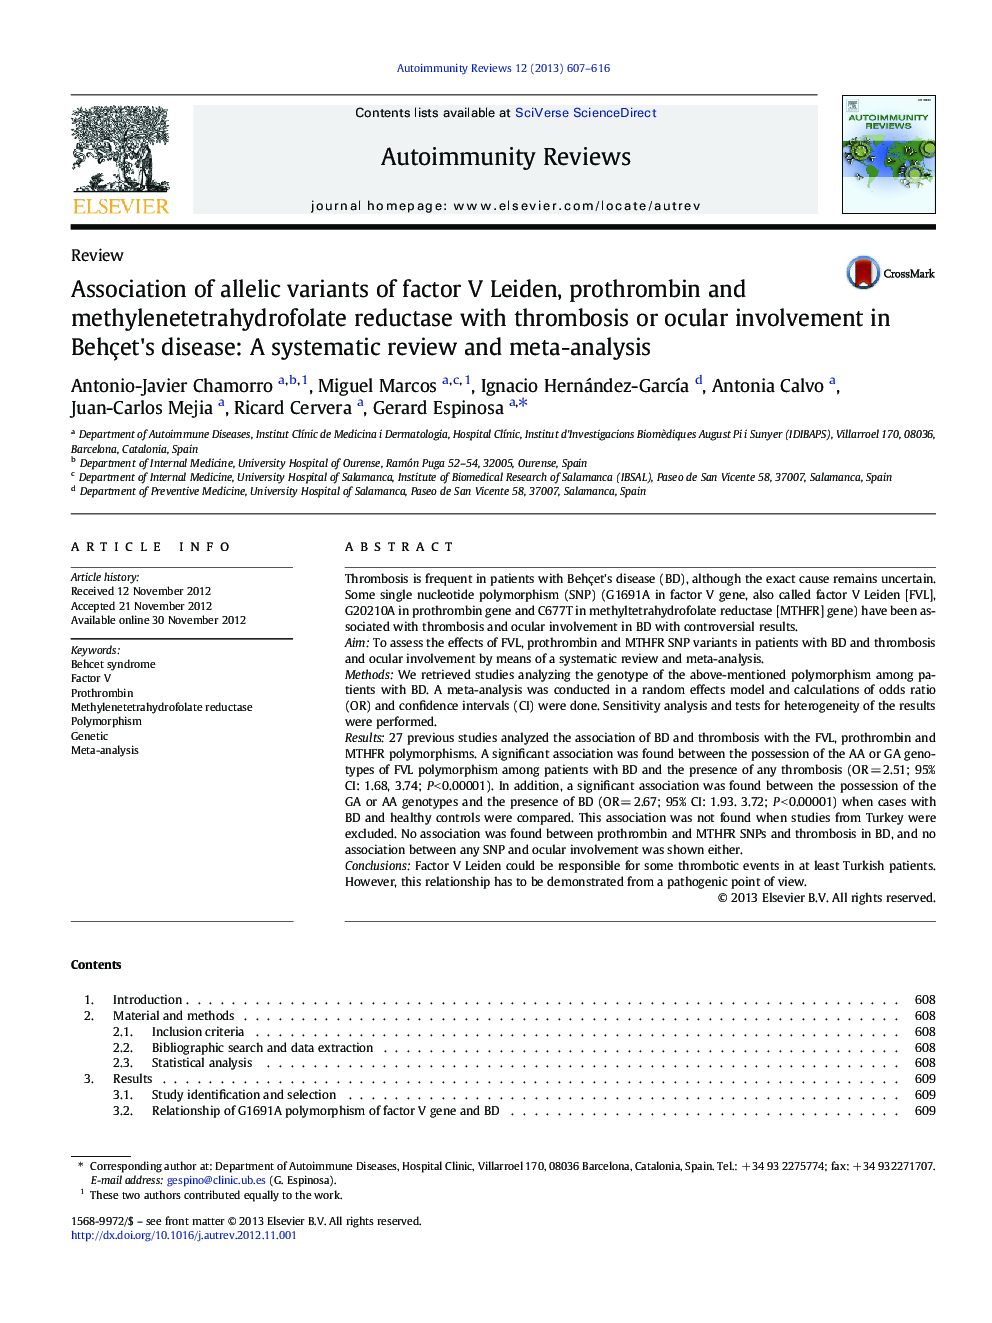 Association of allelic variants of factor V Leiden, prothrombin and methylenetetrahydrofolate reductase with thrombosis or ocular involvement in Behçet's disease: A systematic review and meta-analysis